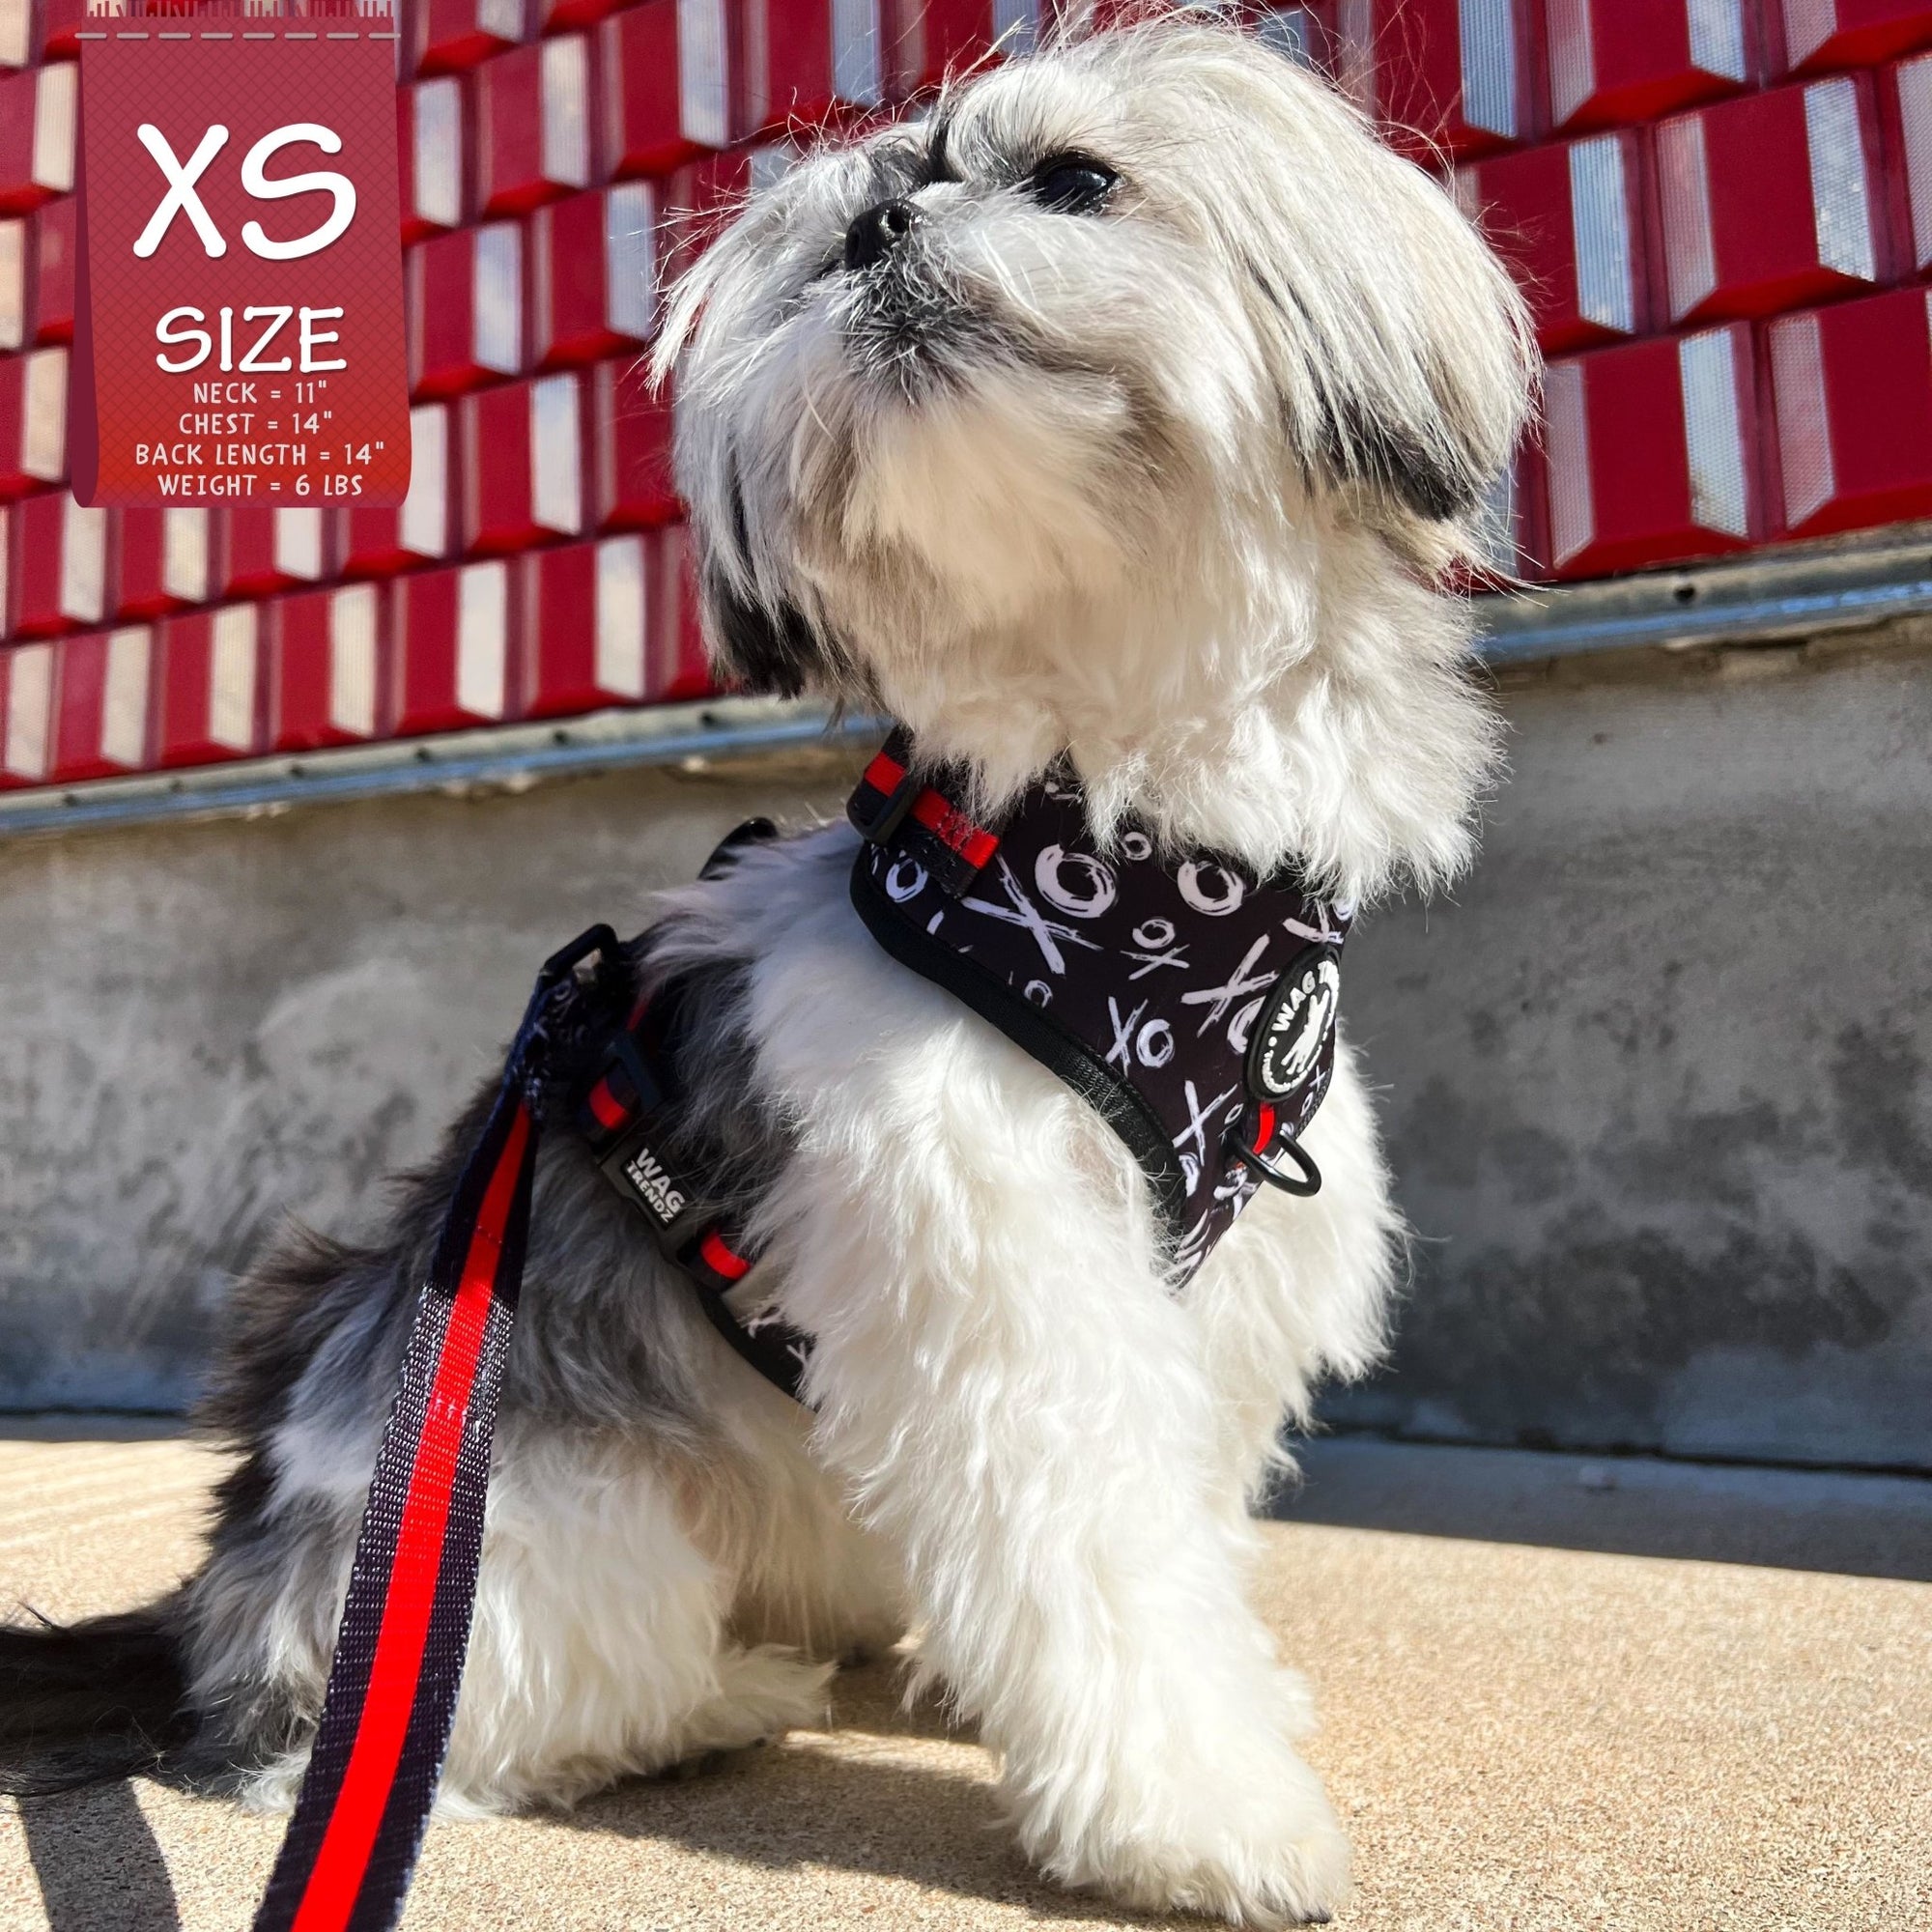 Dog Harness Vests - Adjustable - Front Clip - cute black and white small dog wearing black harness with white XO&#39;s and red accents with matching dog leash - outside with red wall and concrete background - Wag Trendz